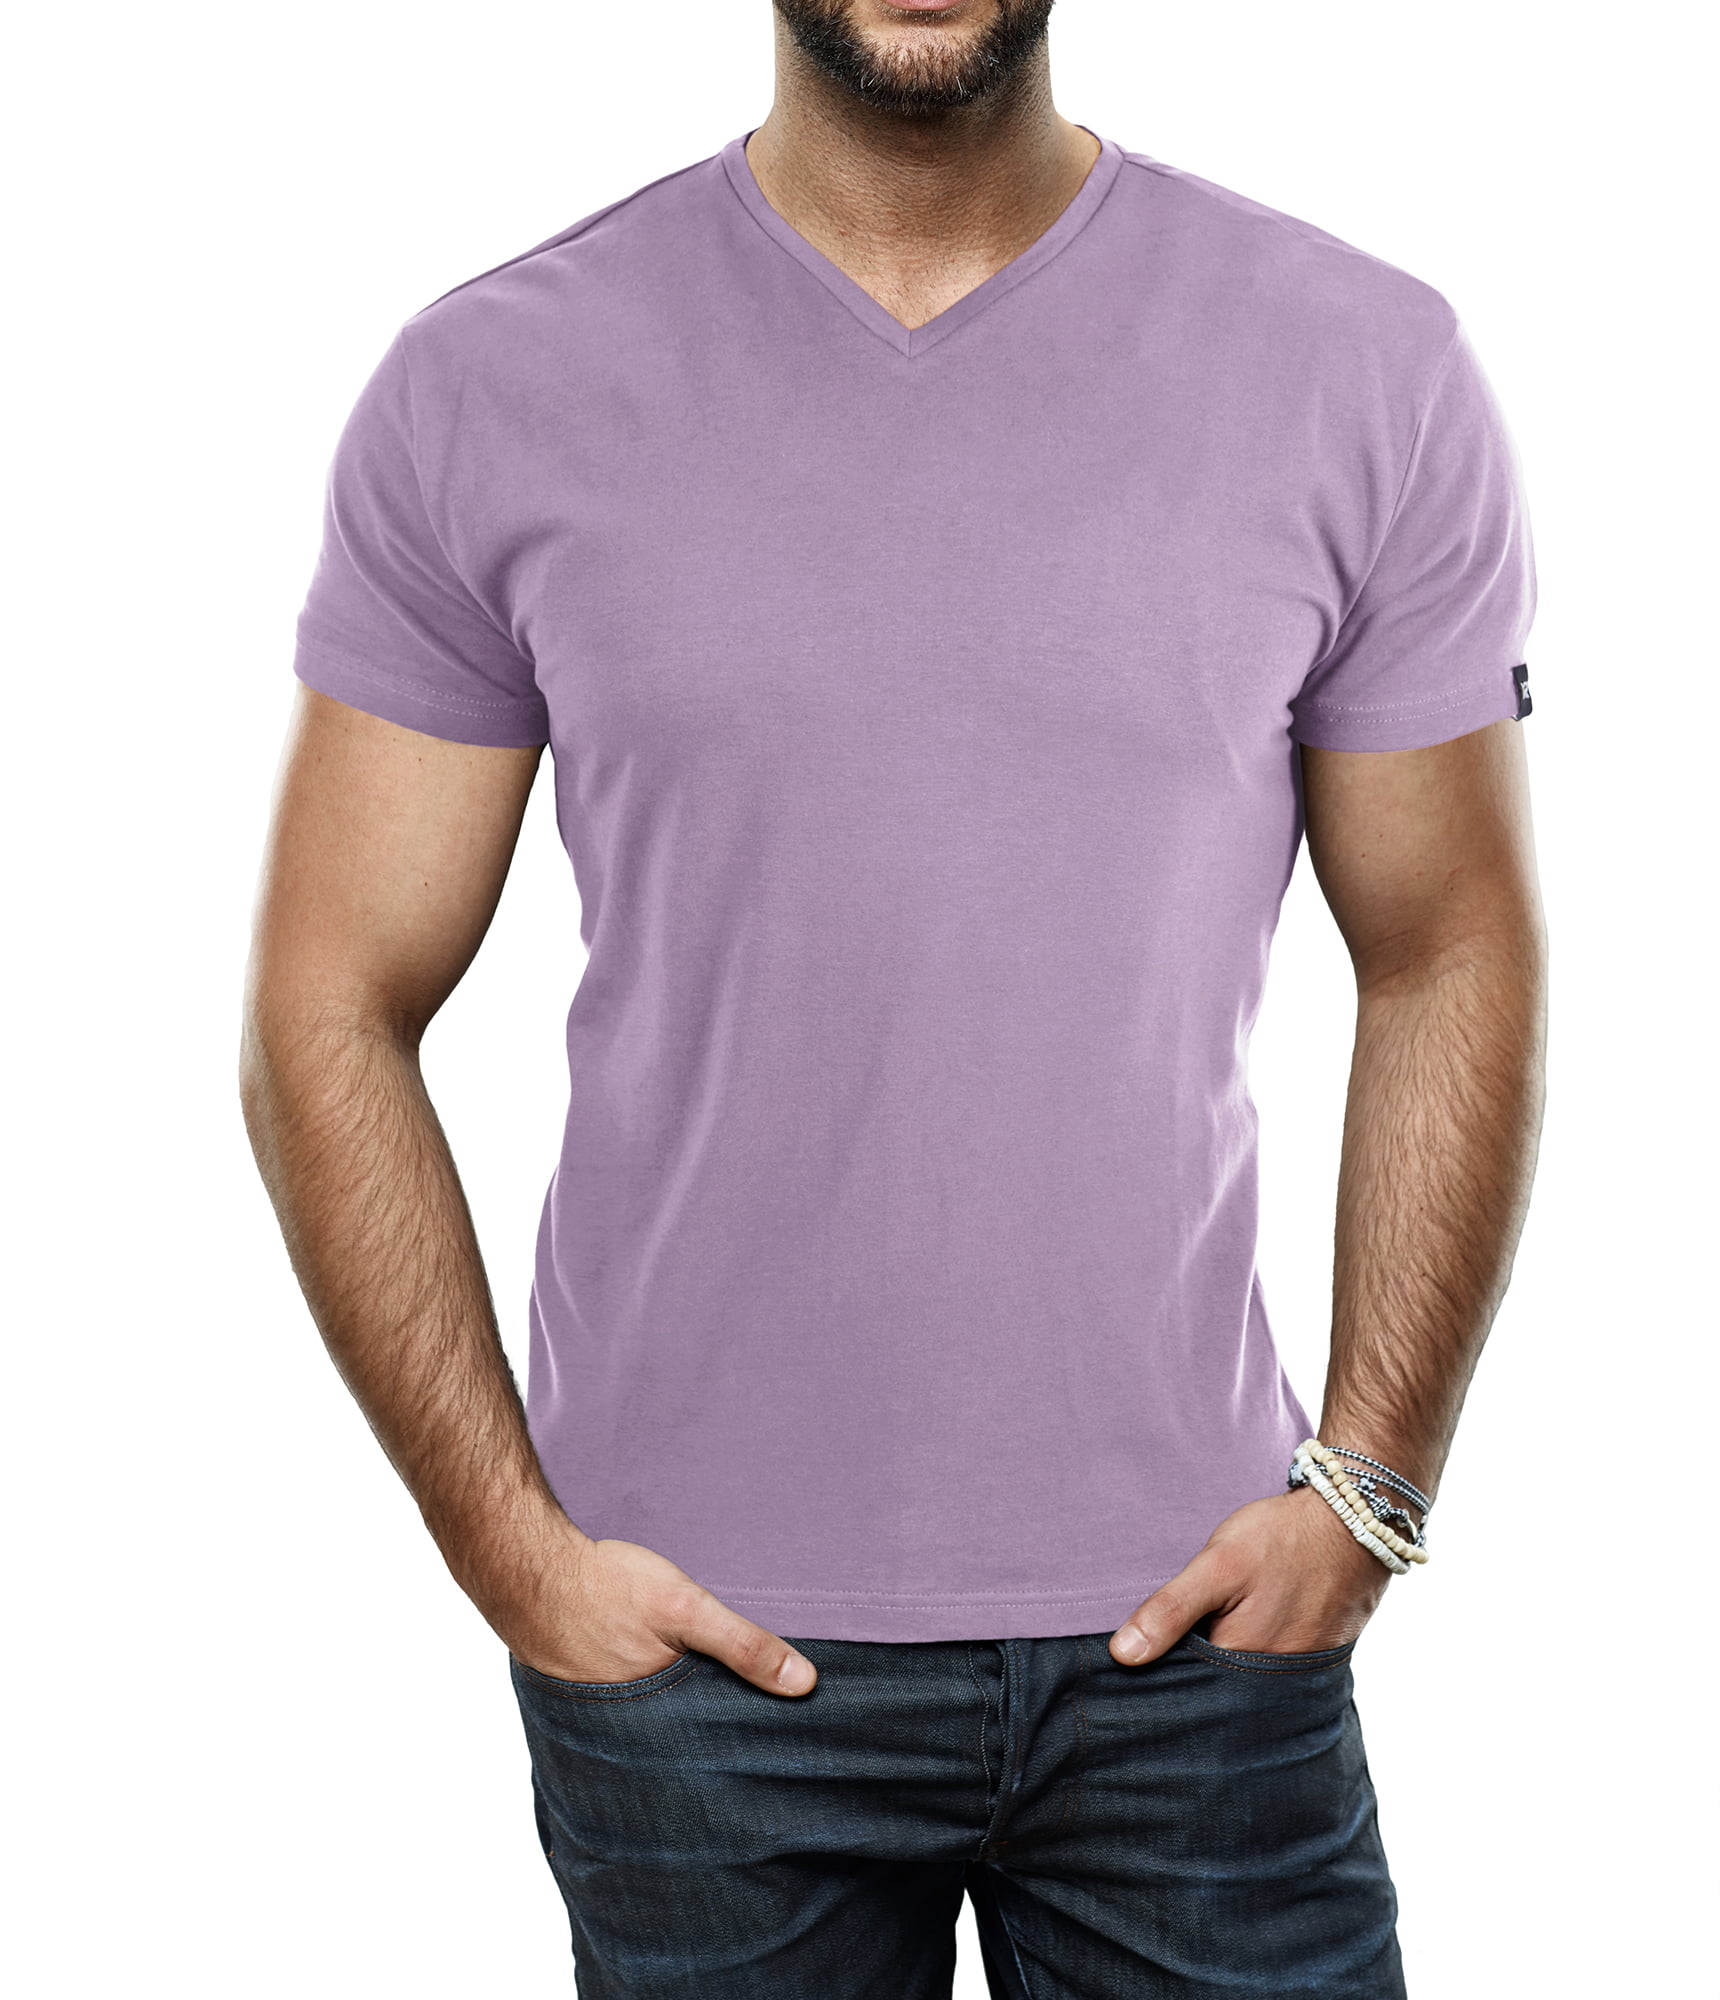 X RAY Mens Soft Stretch Cotton Solid Short Sleeve V-Neck Slim Fit T-Shirt Fashion Casual Tee for Men 